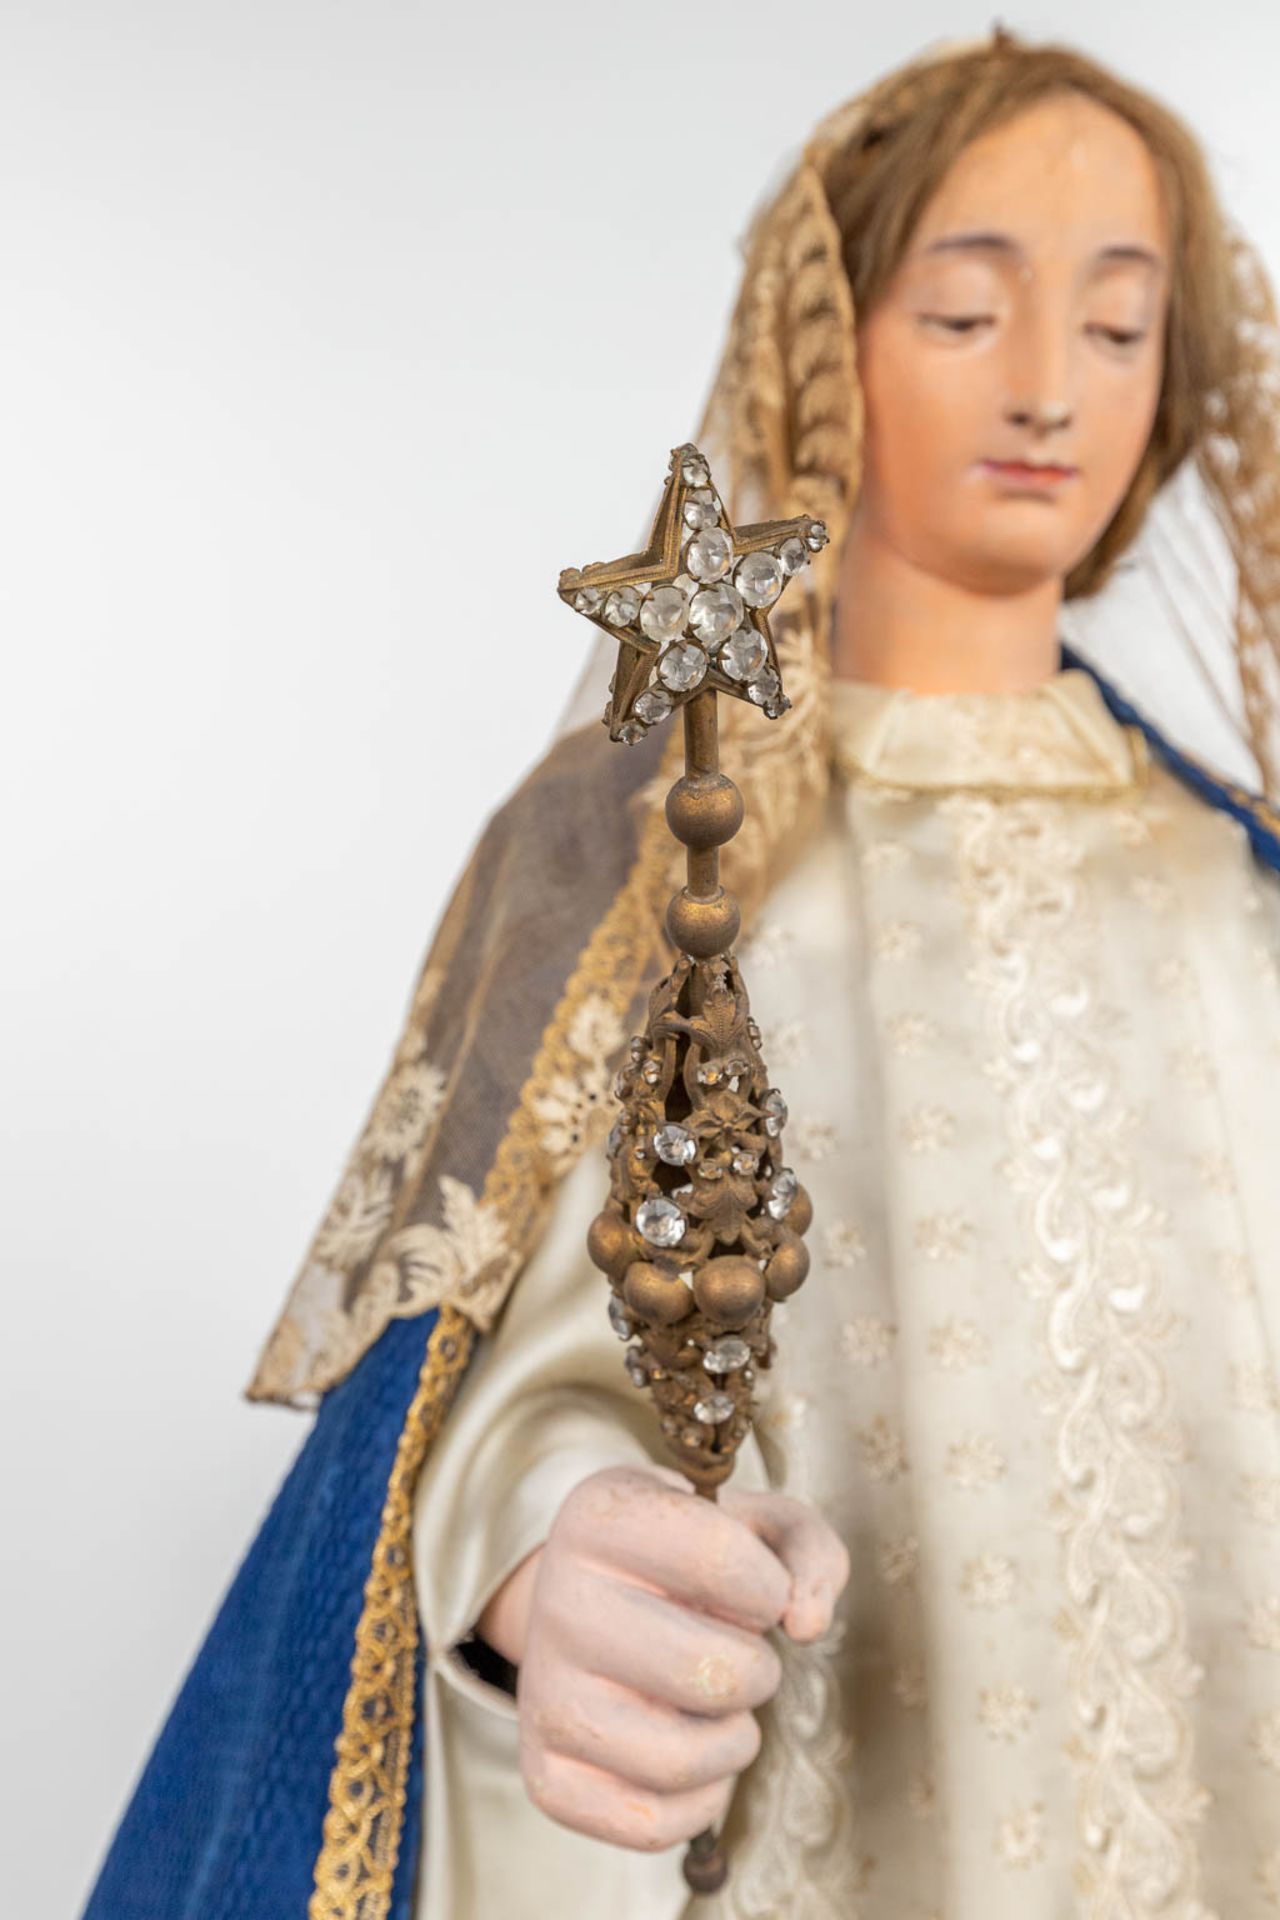 A procession madonna with robes, real hair and made of sculptured wood. 19th century. - Image 3 of 13